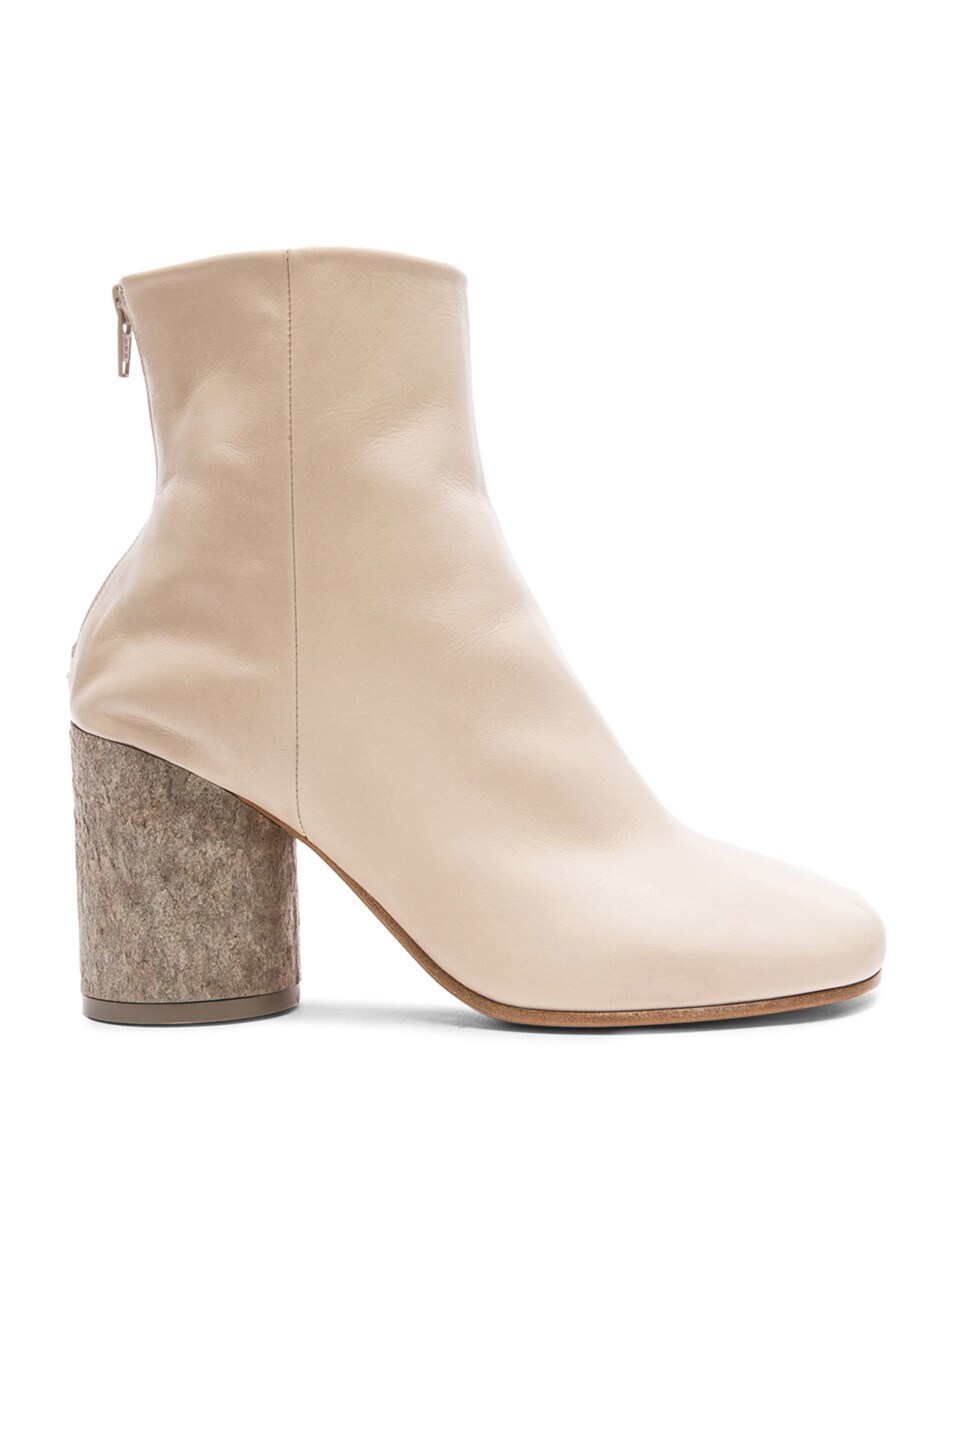 Image 1 of Maison Margiela Baby Calf Boots in Ivory